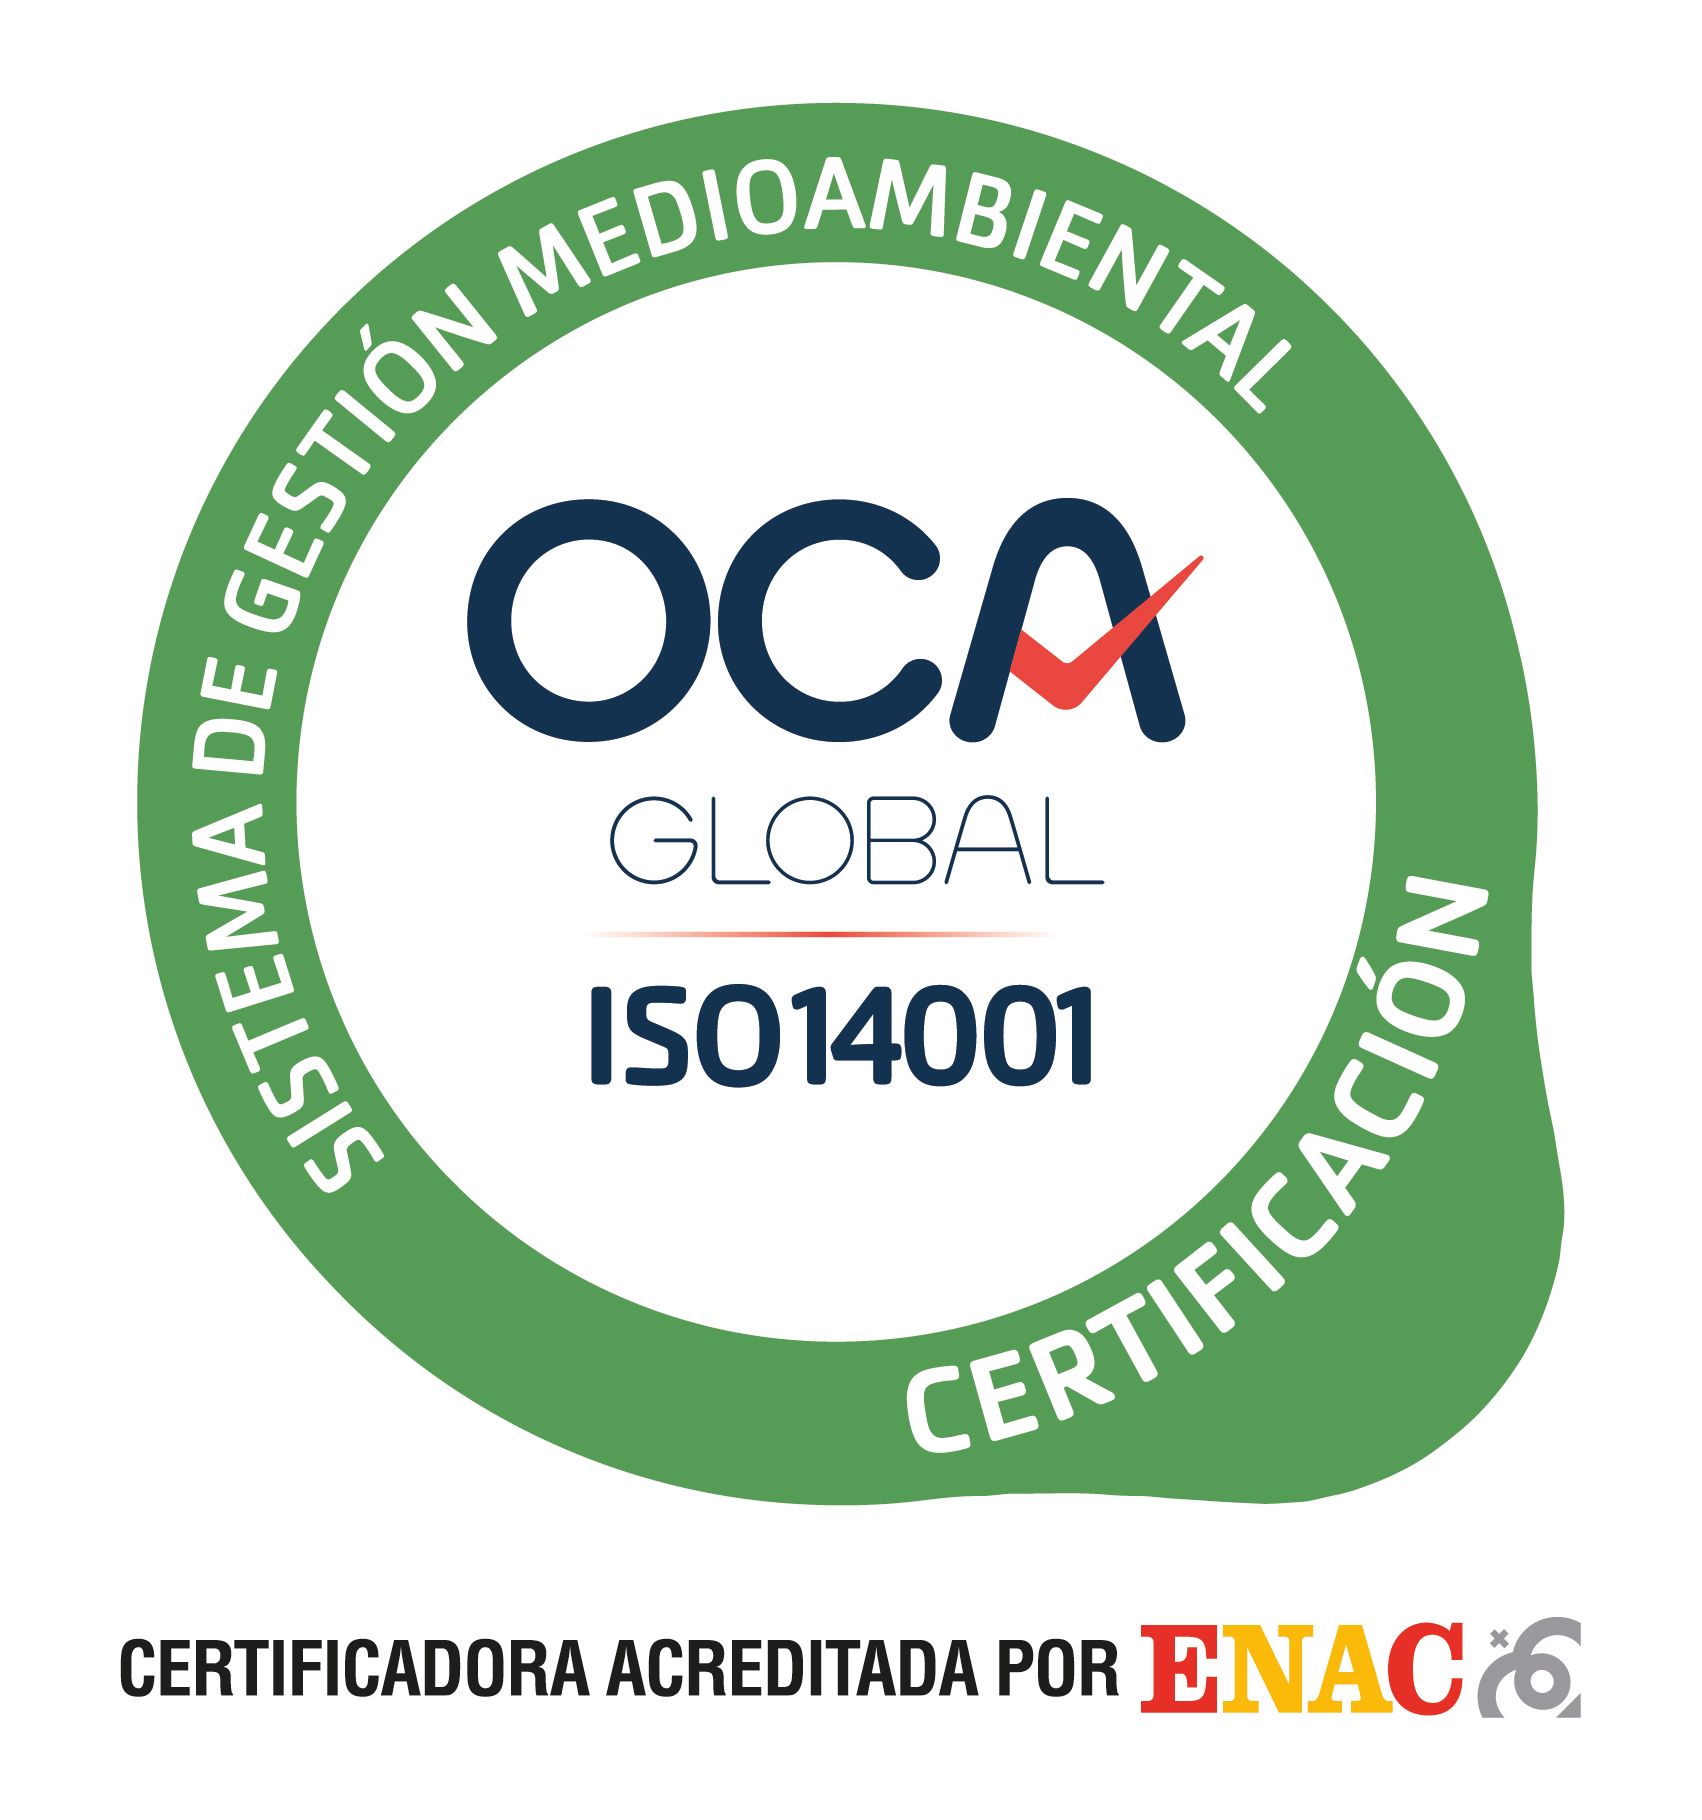 Certification of the environmental management system in accordance with the UNE-EN ISO 14001:2015 standard